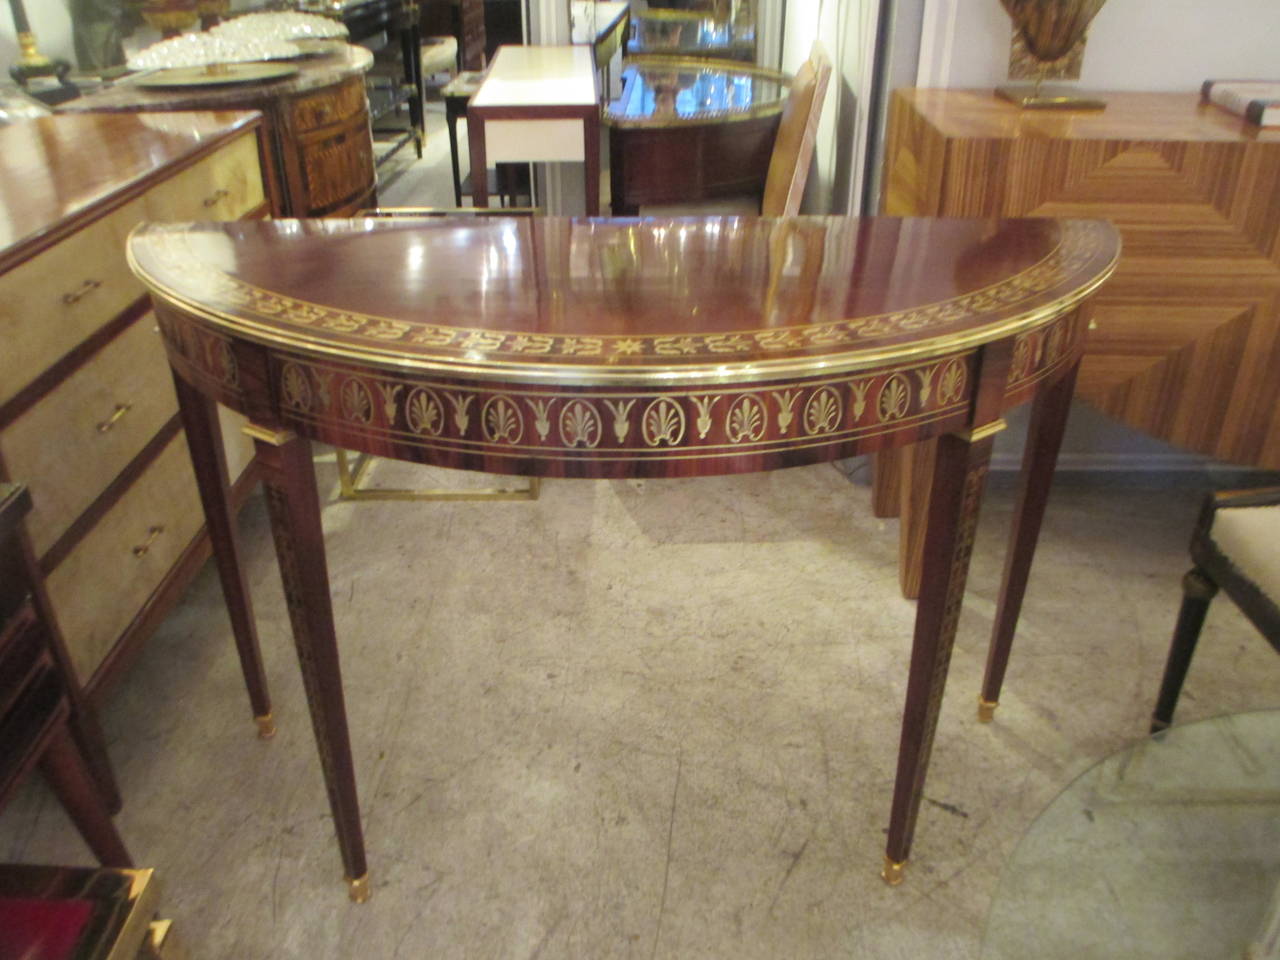 An exquisite Pair of  Regency style, Brass-Inlaid Rosewood  Demi-lune Consoles